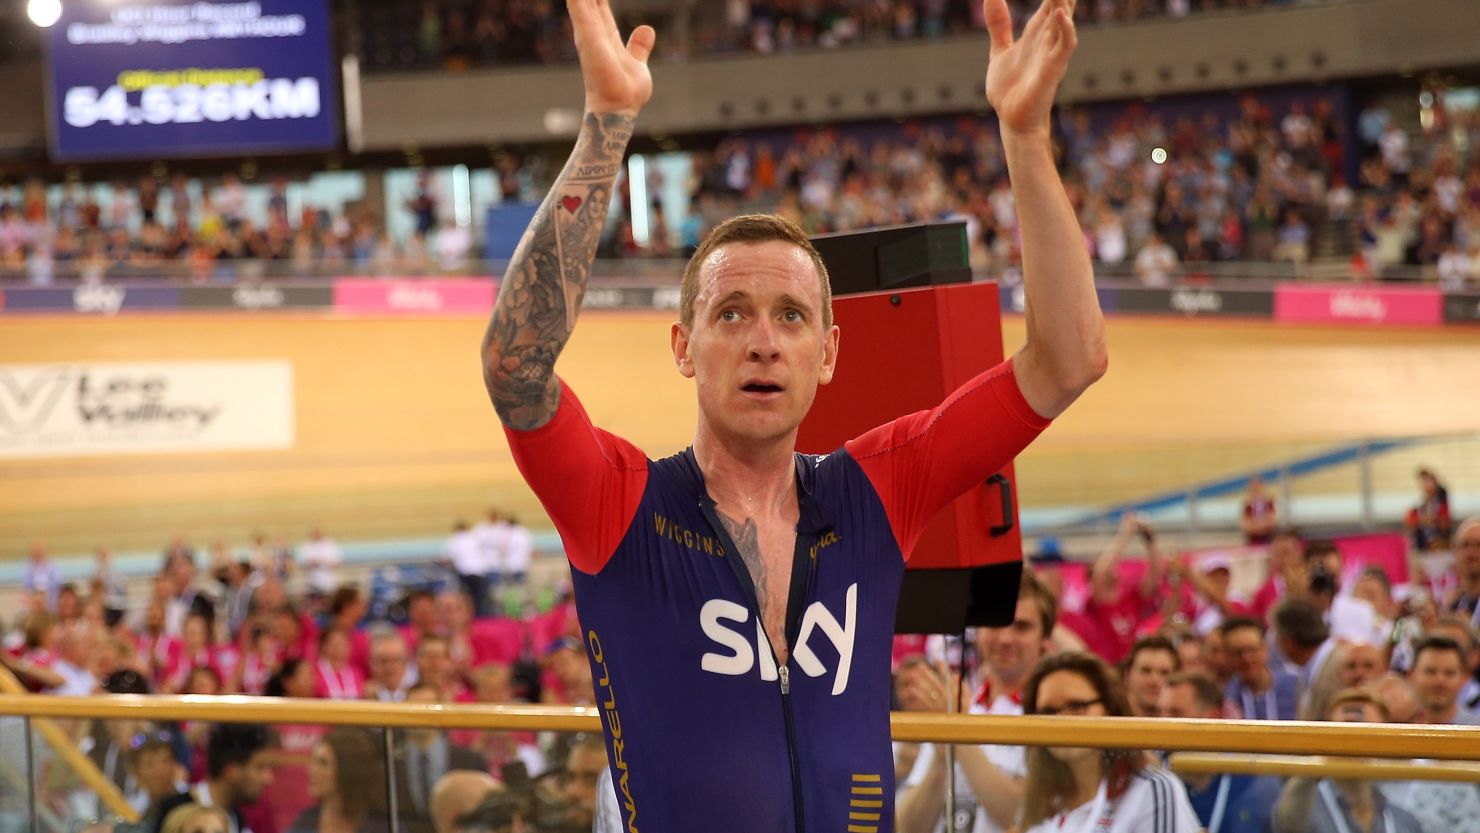  Bradley Wiggins celebrates his new world hour record in front of a capacity crowd at the Olympic velodrome in London.